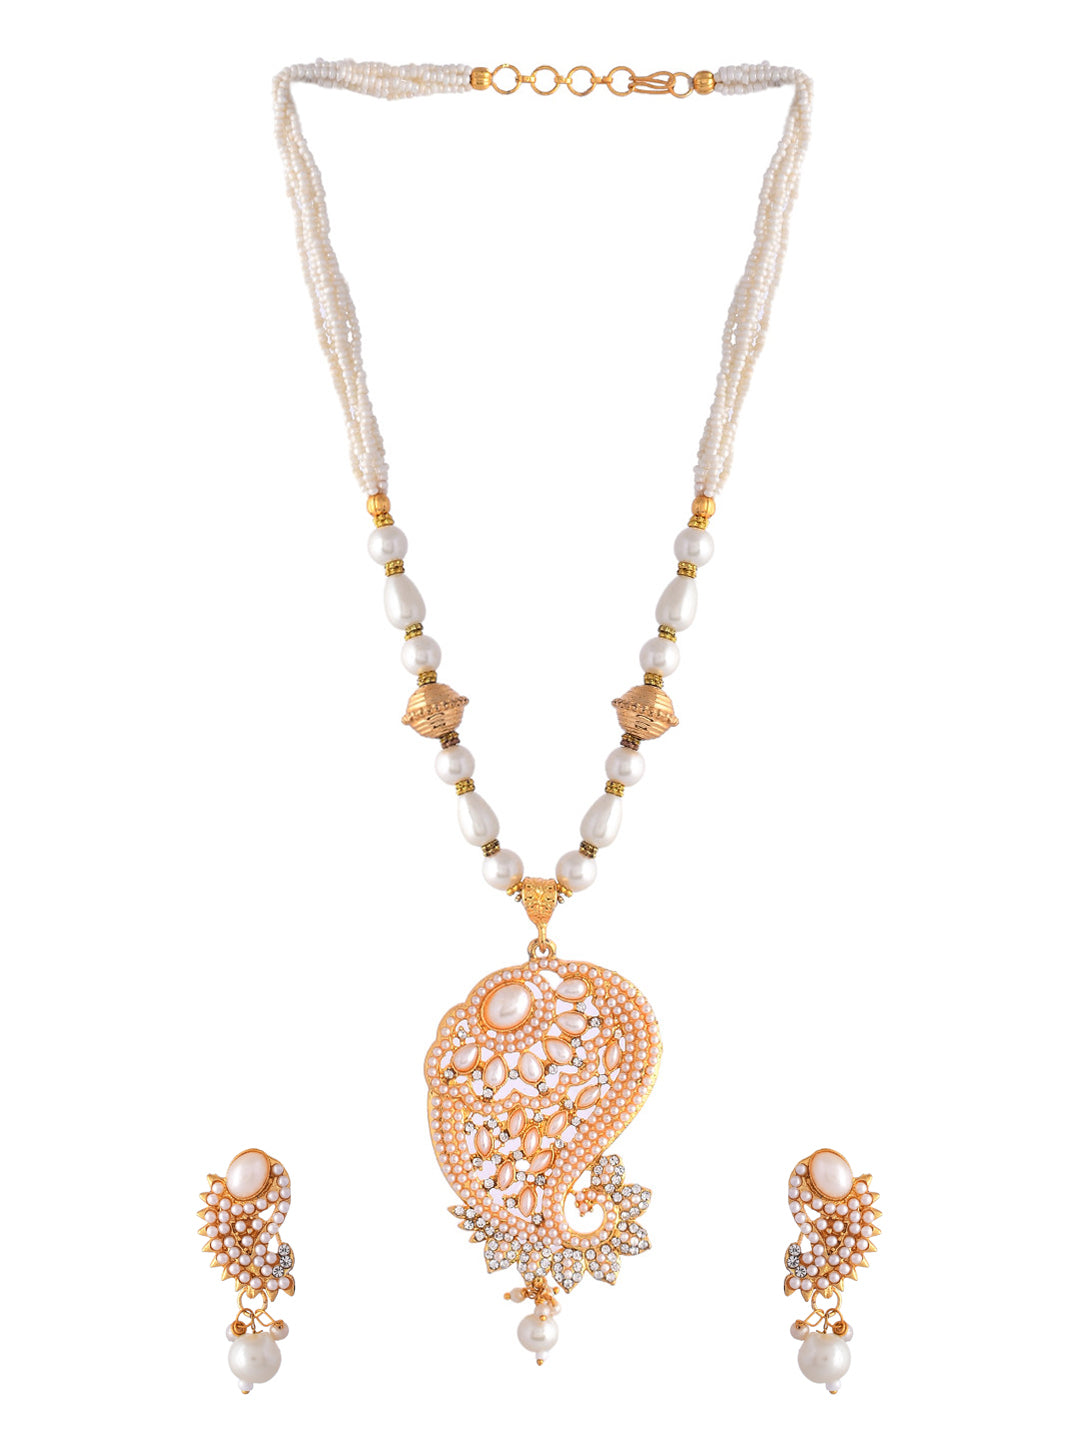 Women's Gold Plated And White Pearl Handcarfted Necklace With Earrings Set - Voj